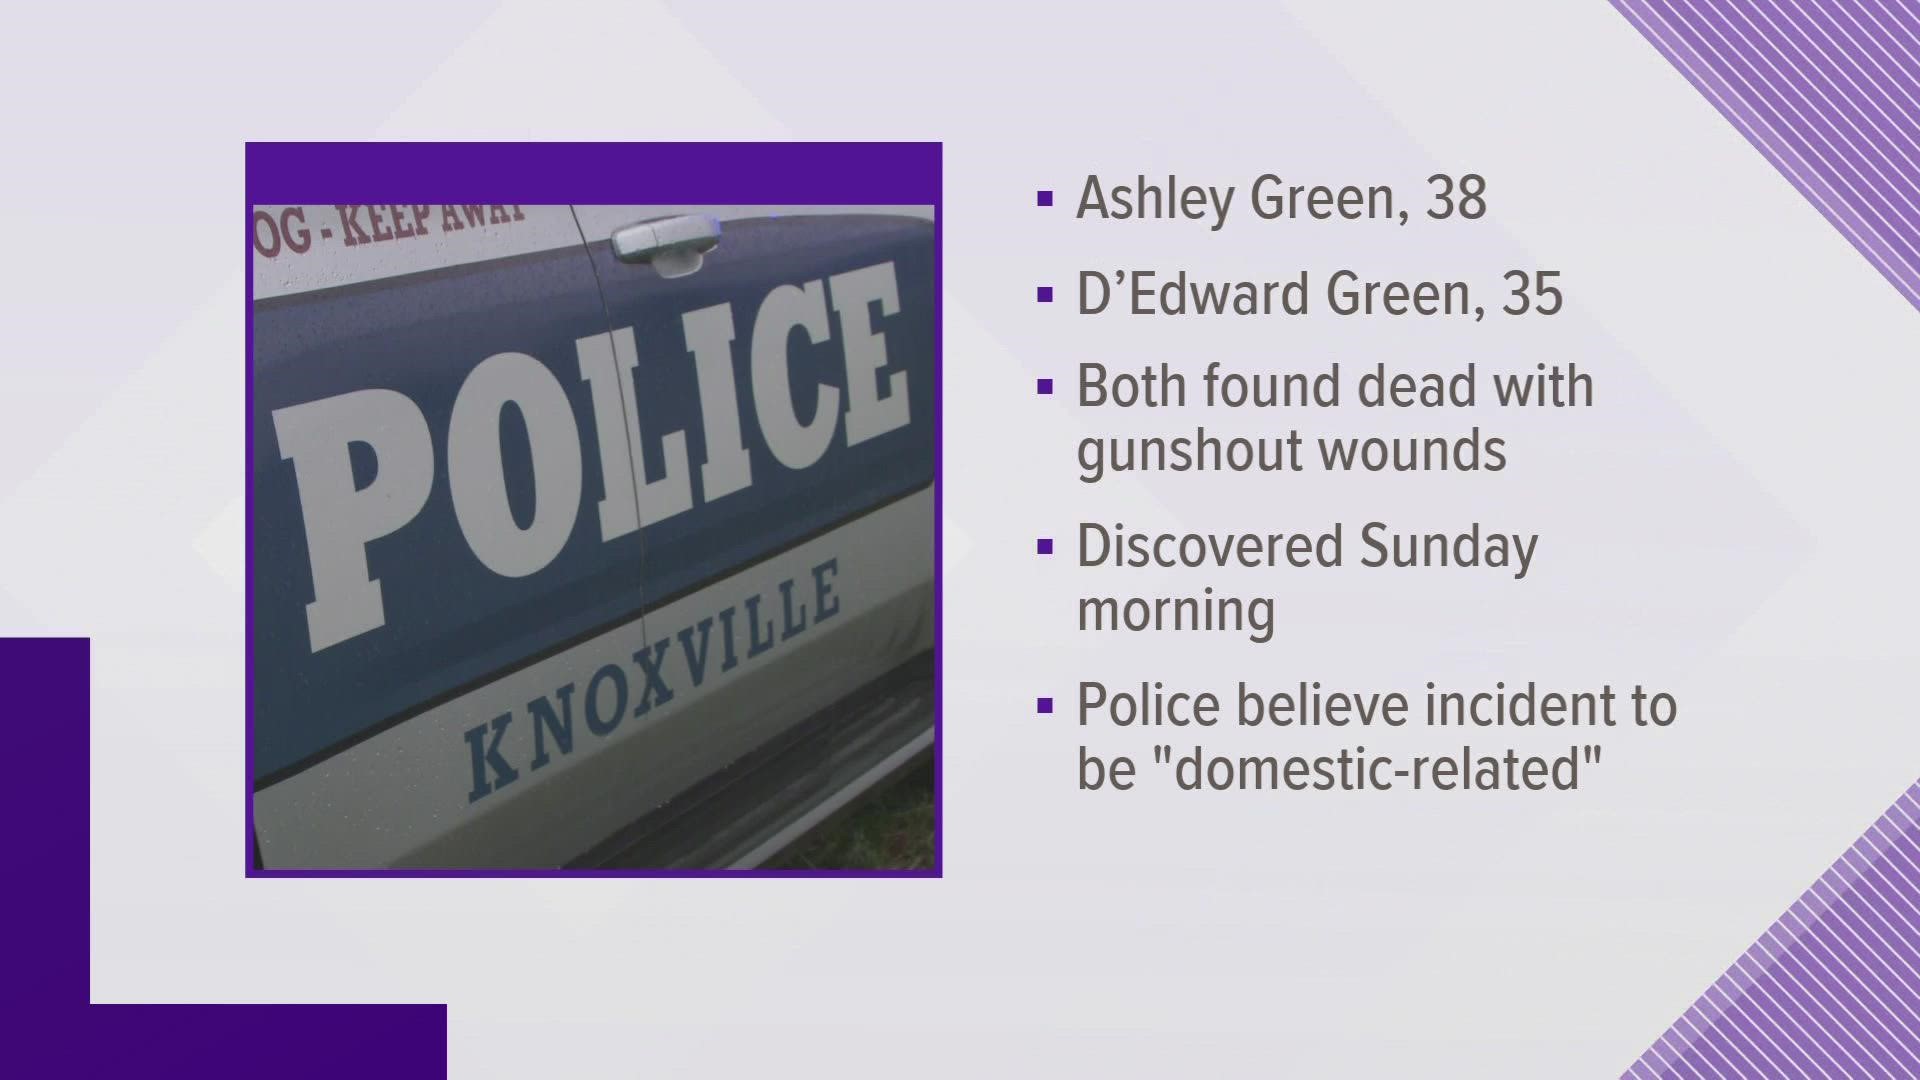 Police identified the victims as 38-year-old Ashley Green and 35-year-old D'Edward Green, both from Knoxville.